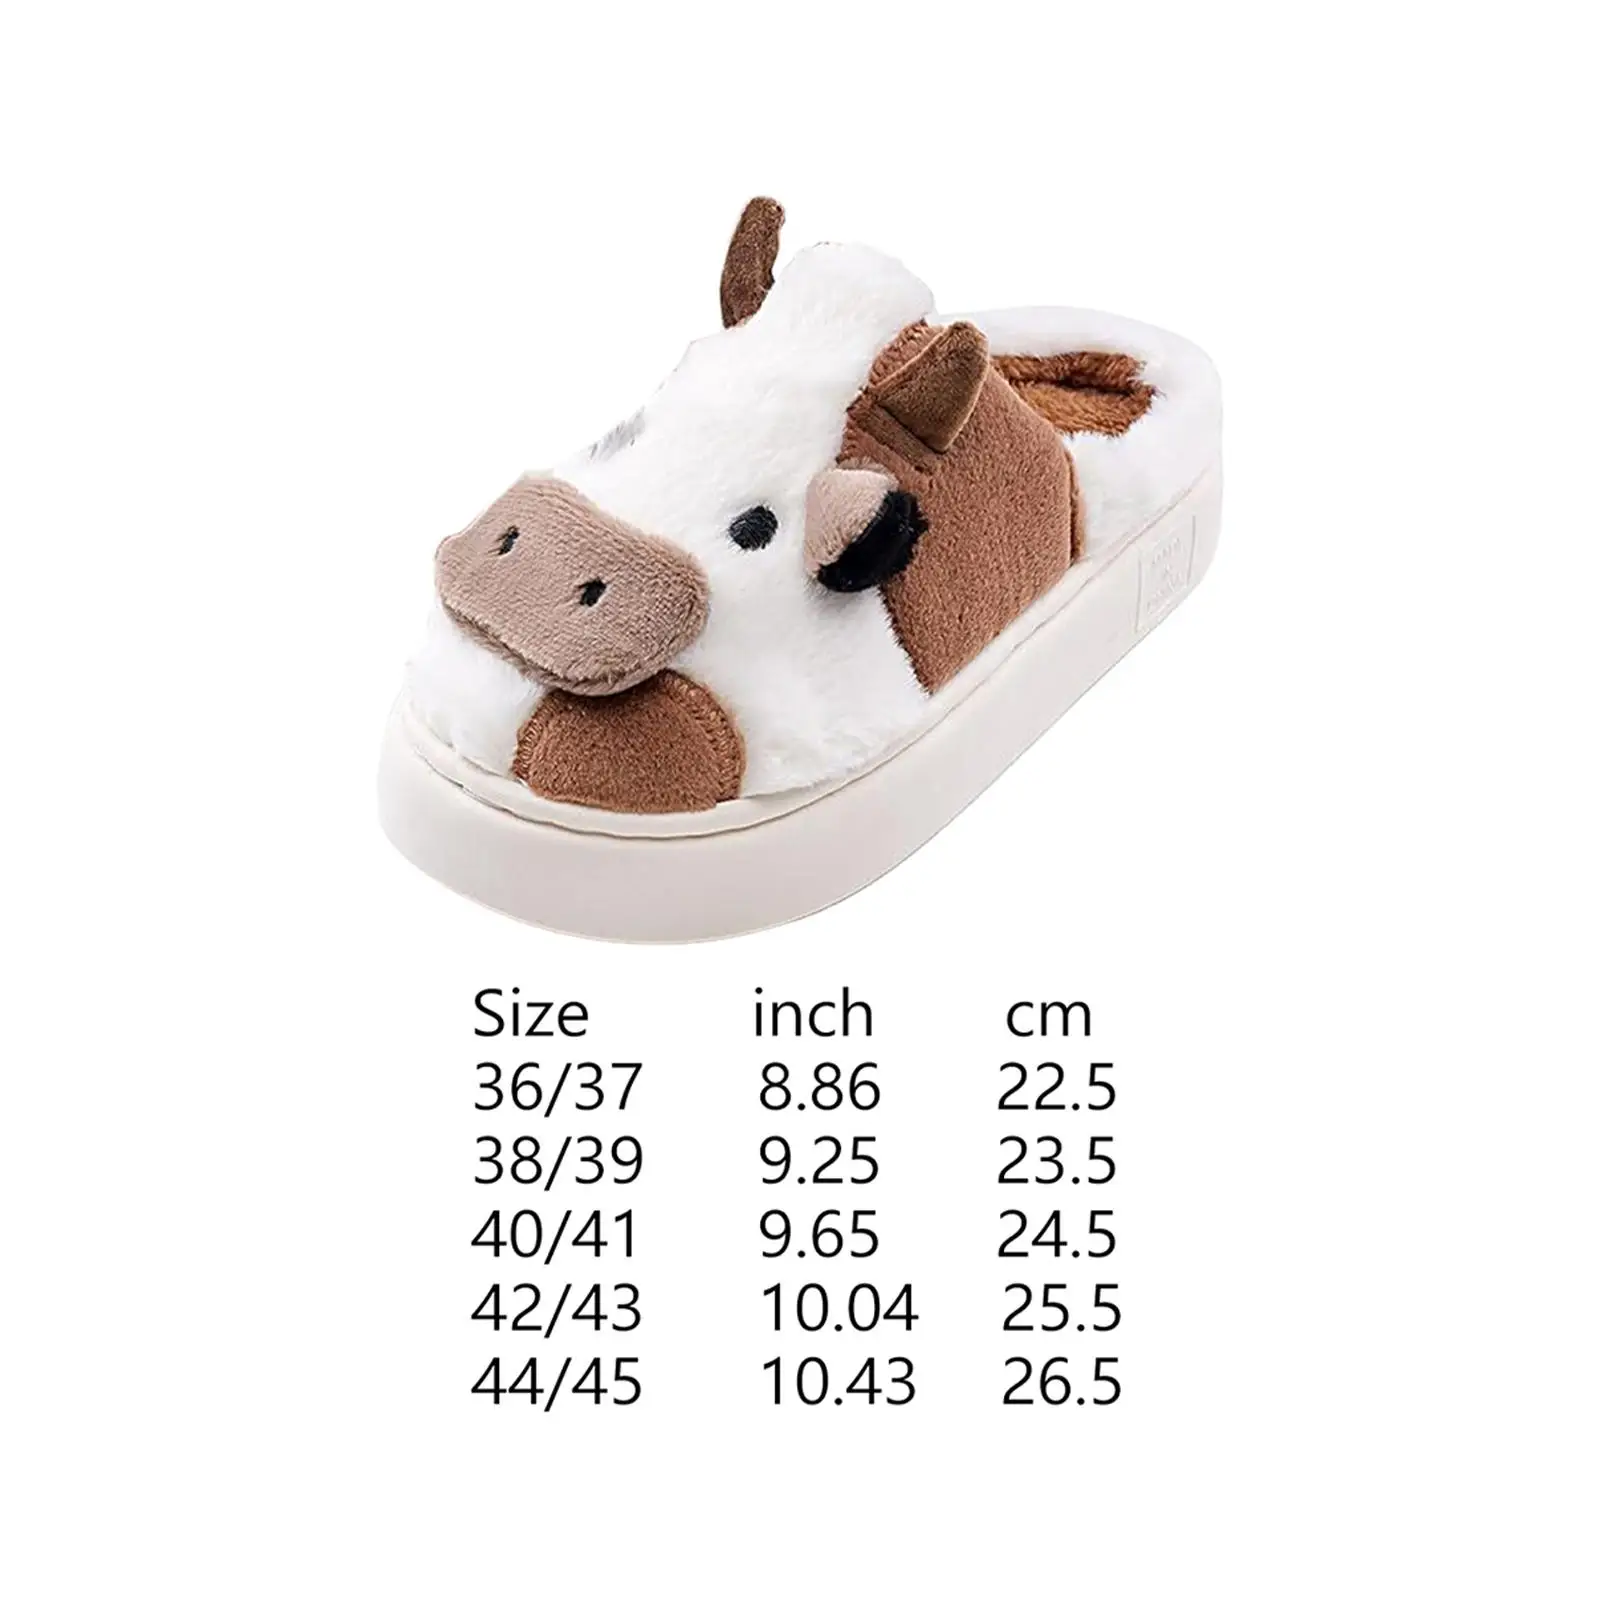 Winter Cow Plush Slippers Adorable Lightweight Warm Novelty Birthday Gift Animal Home Shoes for Dorm Apartment House Travel Men